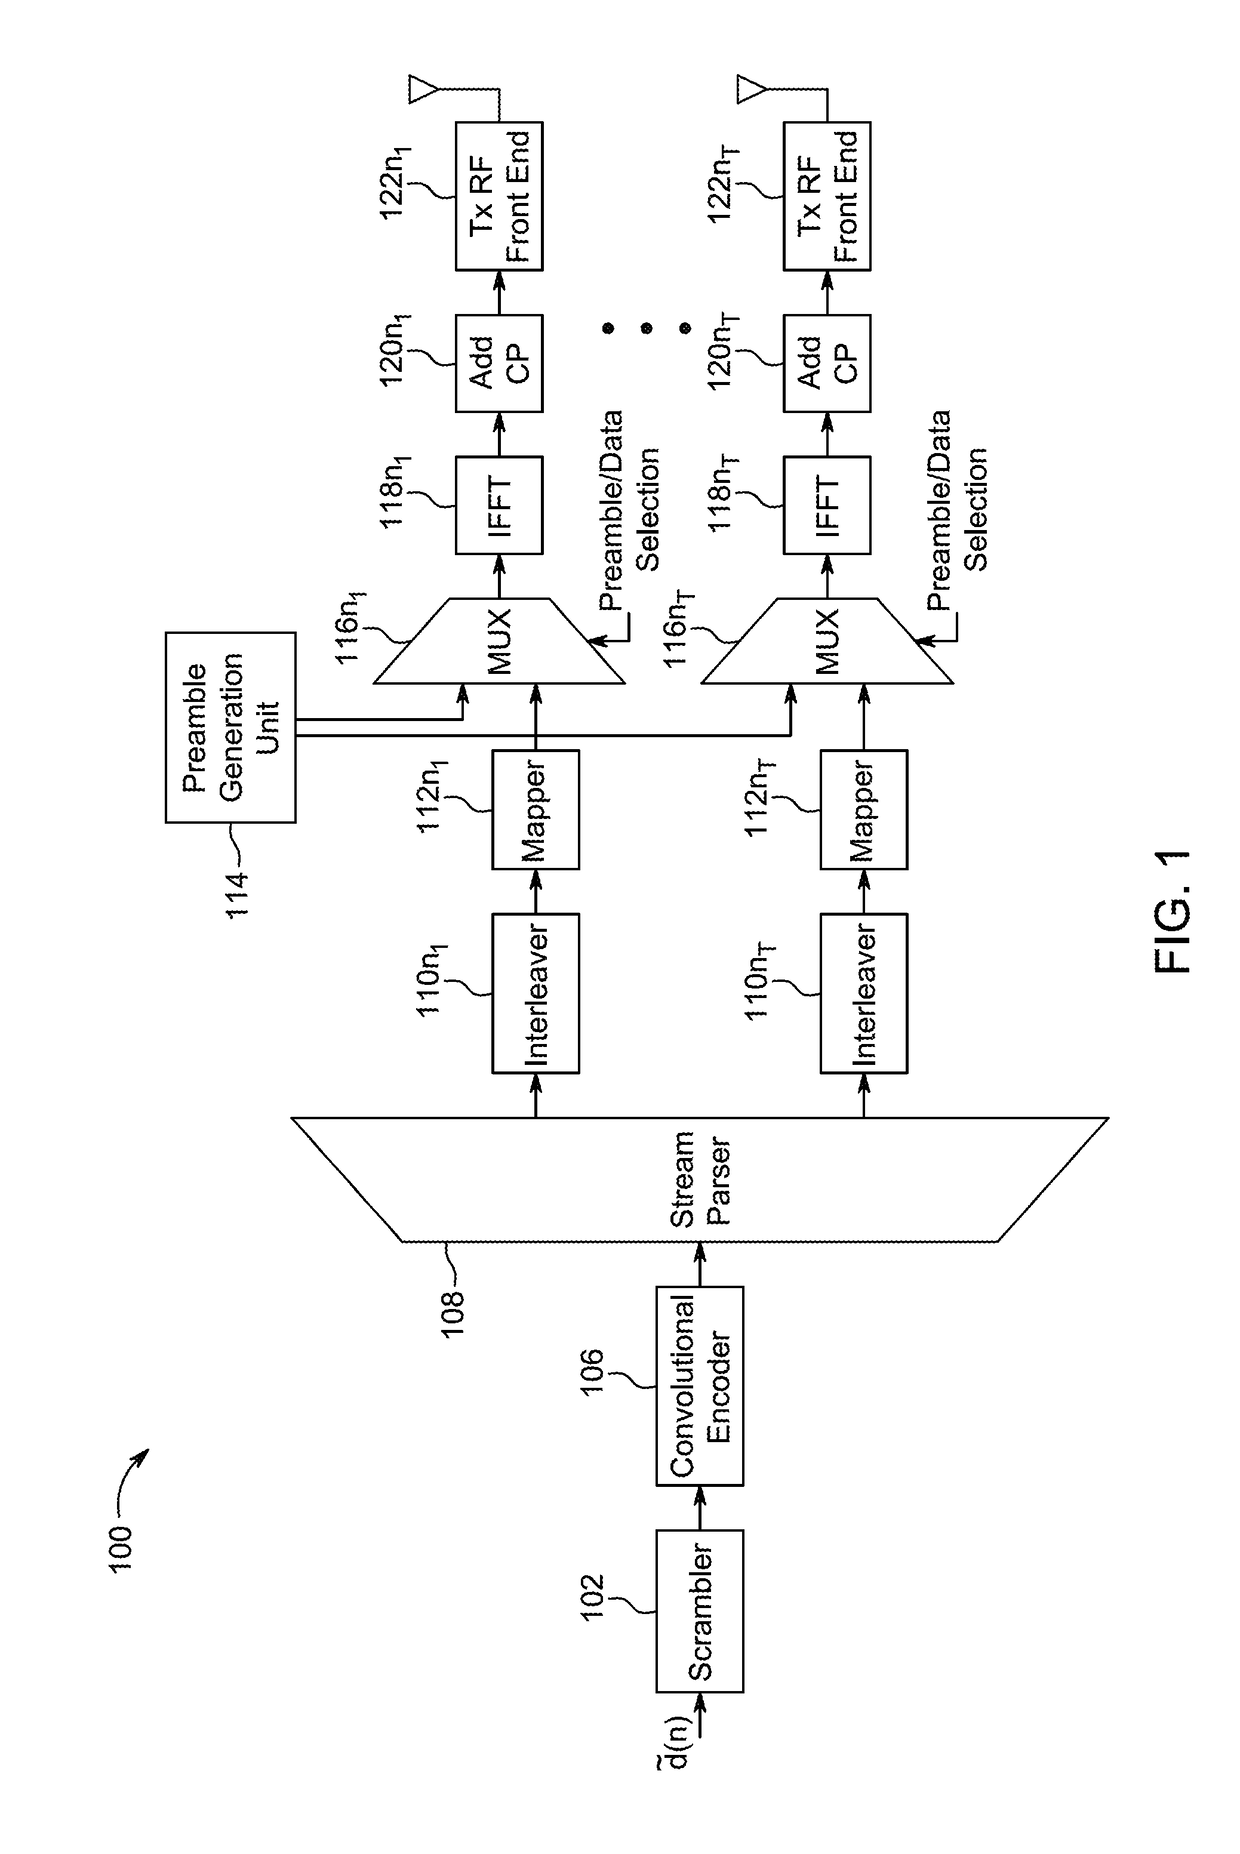 Systems and methods for calculating log-likelihood ratios in a MIMO detector